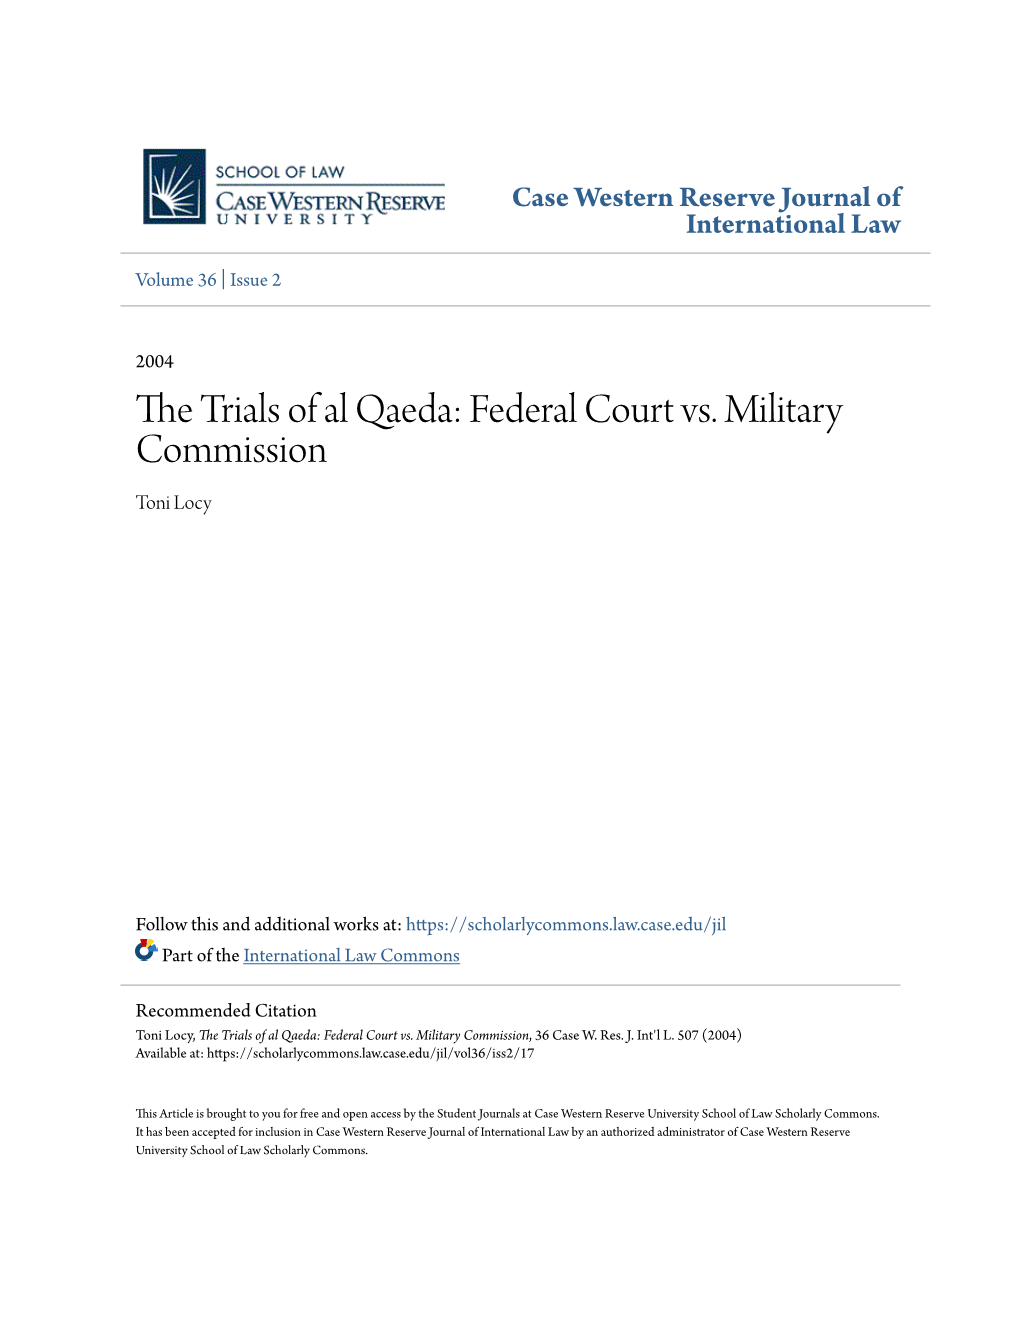 Federal Court Vs. Military Commission Toni Locy